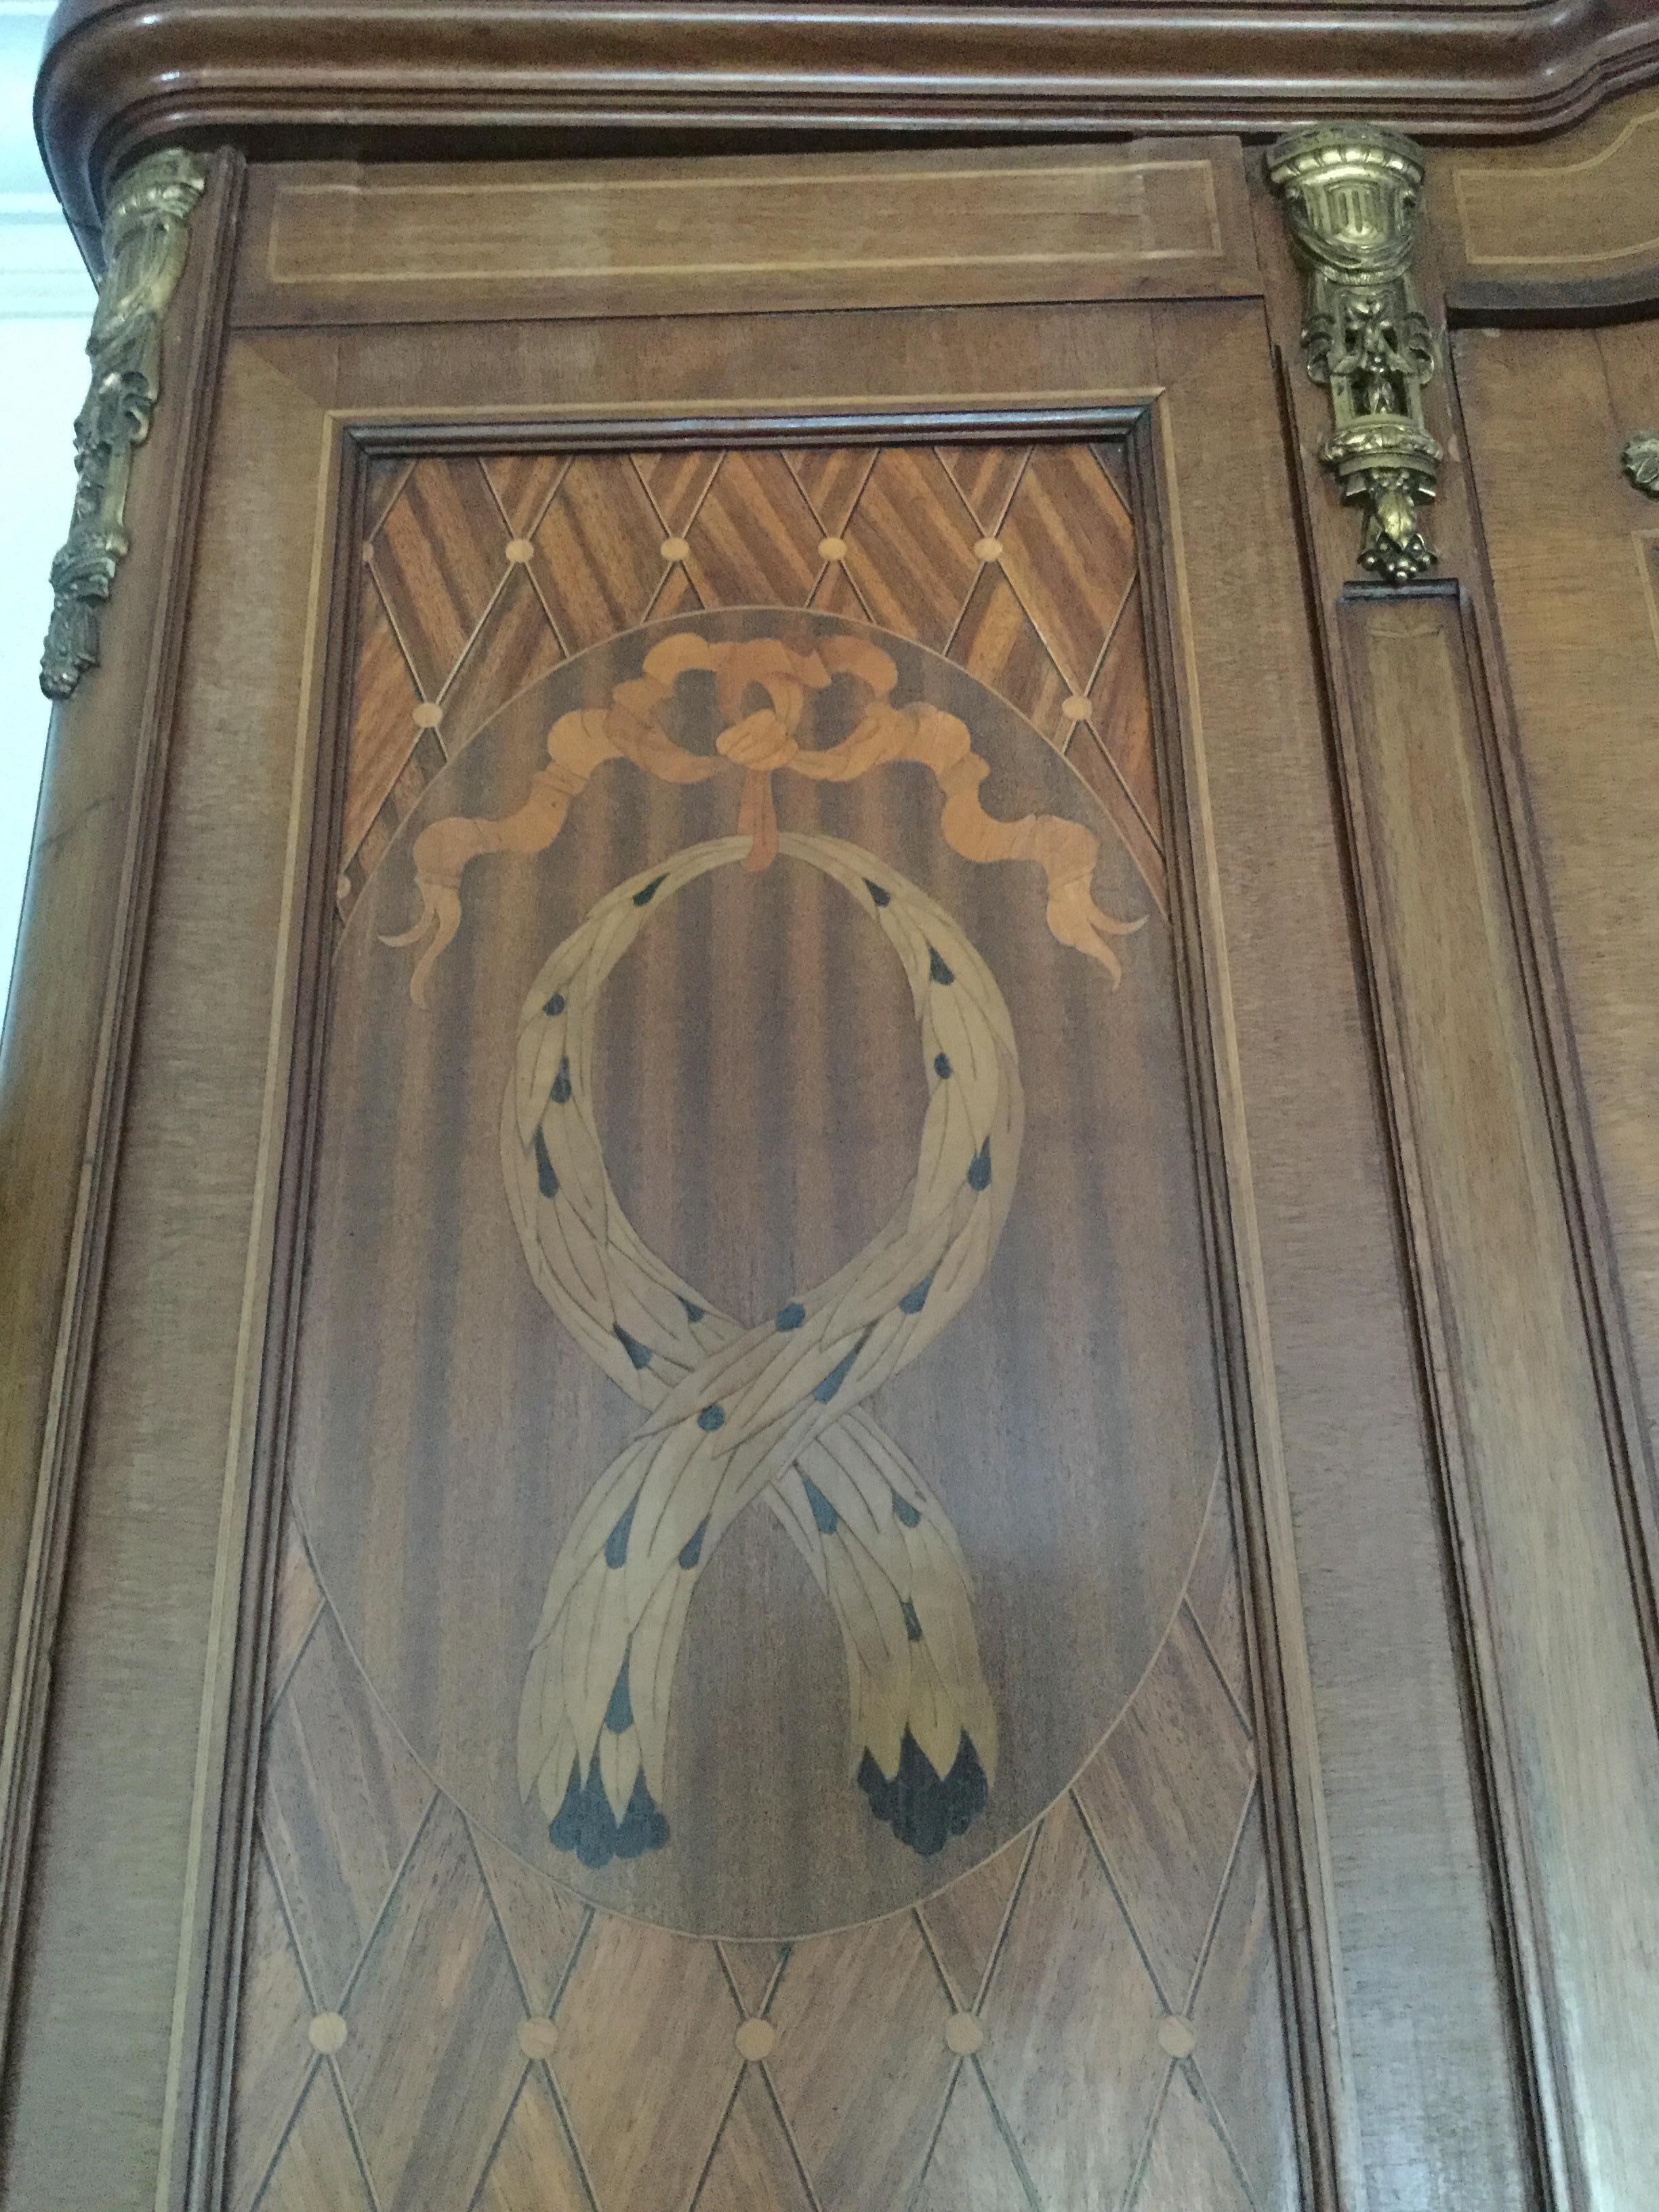 Handsome Louis XVI style walnut armoire. This 3-door armoire features a central beveled mirrored door and 2 side doors with marquetry. There is an hermine motif on each door made of inlaid wood and reminiscent of French royalty There are decorative